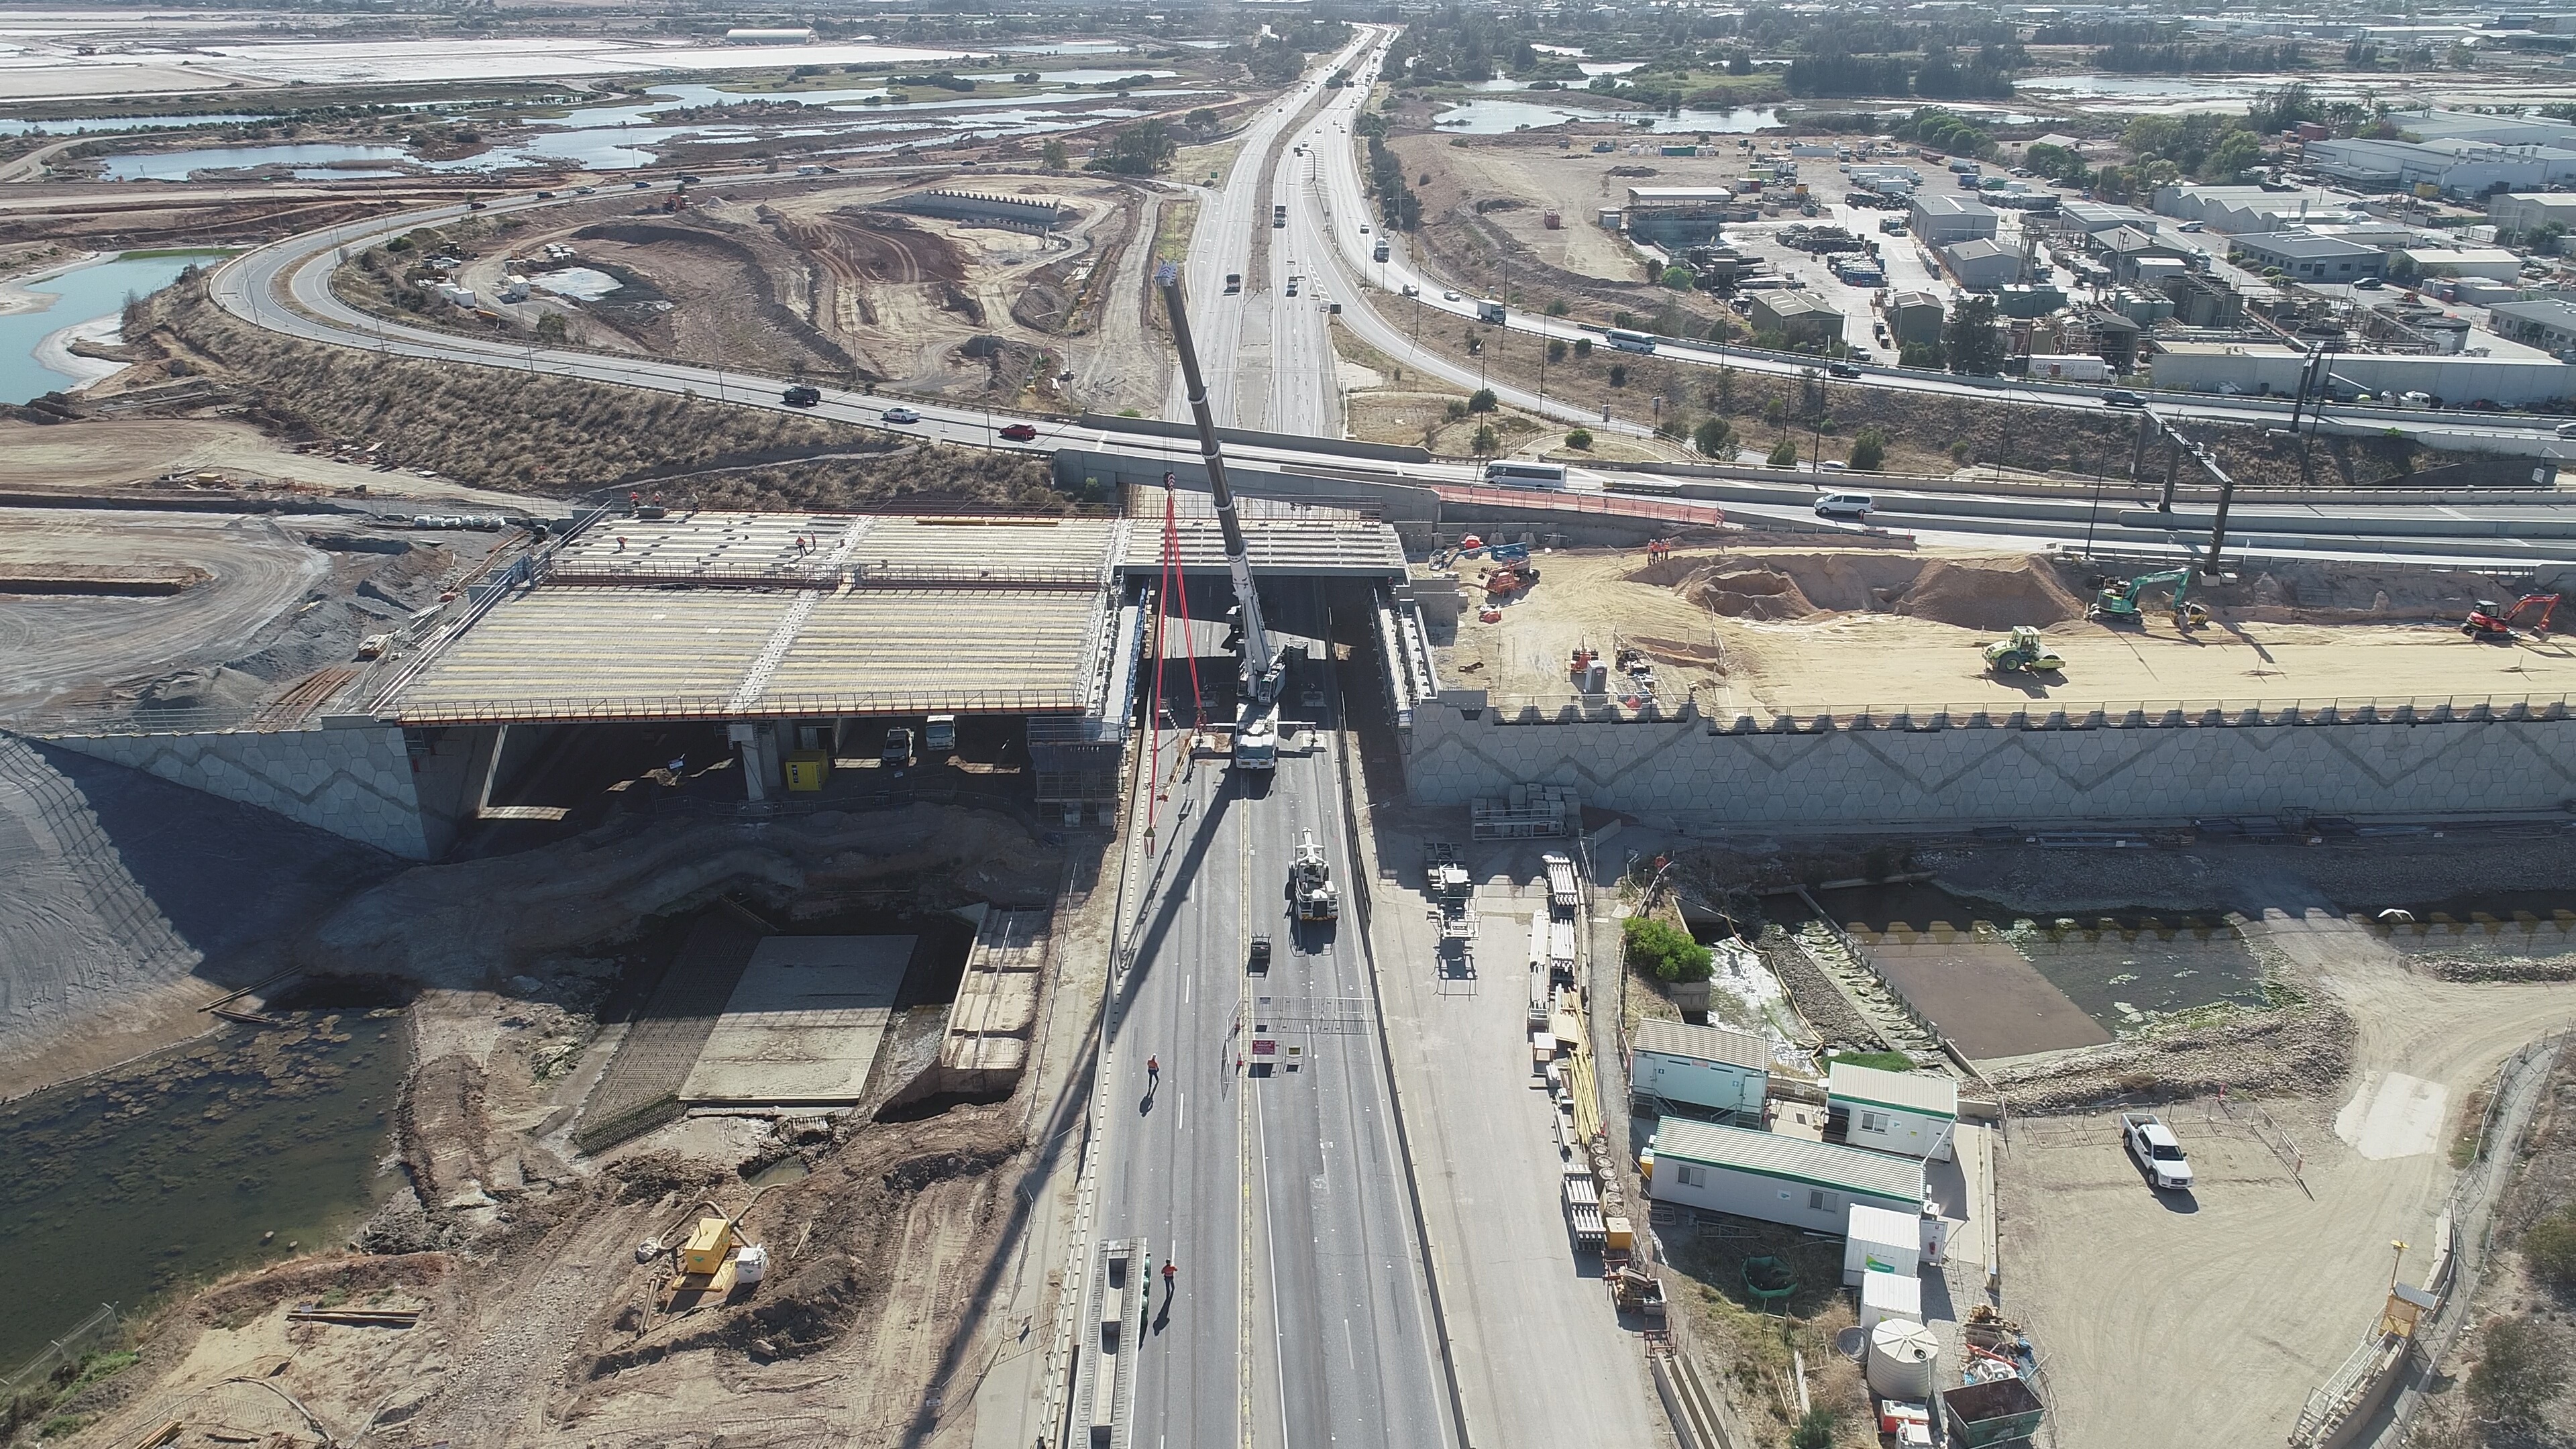 400 tonne crane placing 40-tonne bridge beams in position over the Port River Expressway (looking east) - January 2019